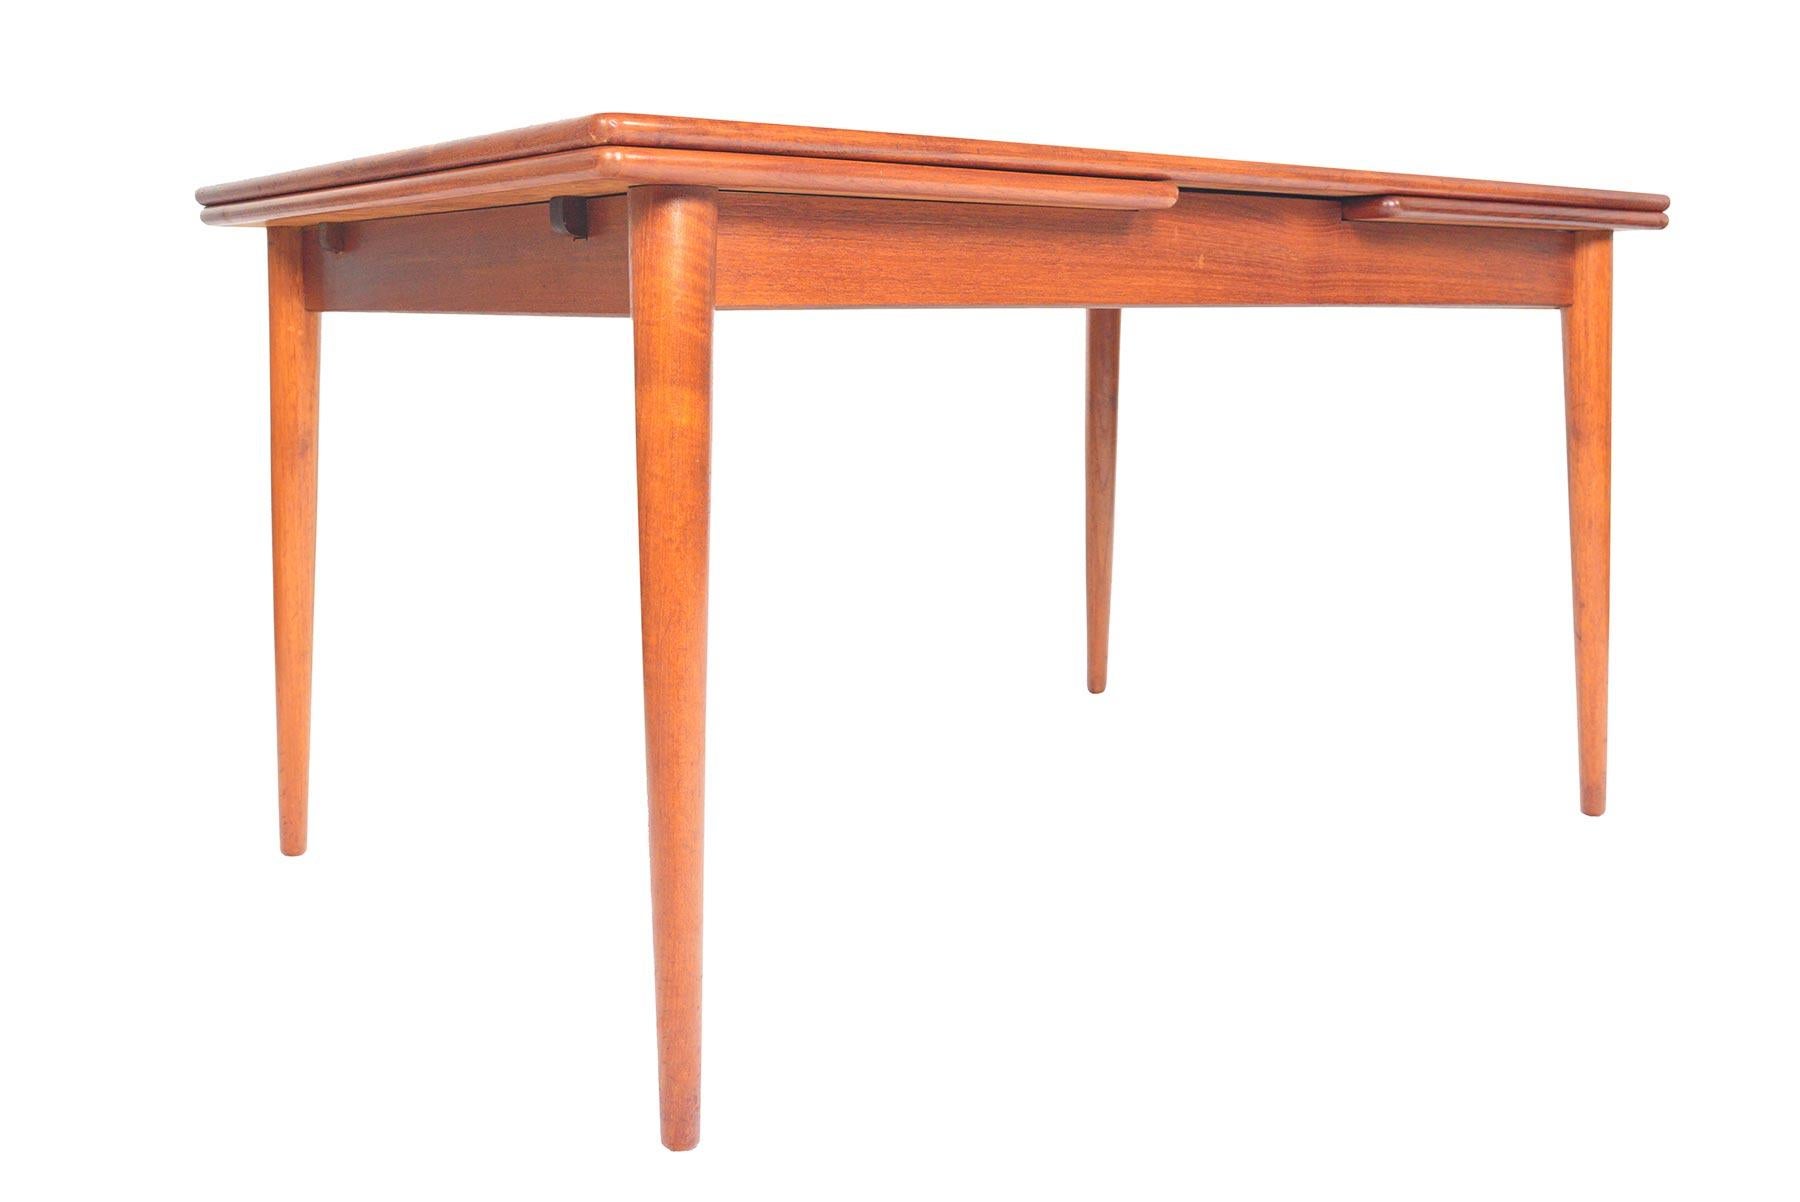 This gorgeous Danish modern teak dining table offers sleek banding and a tapered leg. Two draw leaves pull-out to almost double the size of the table for entertaining. Table extends to 96